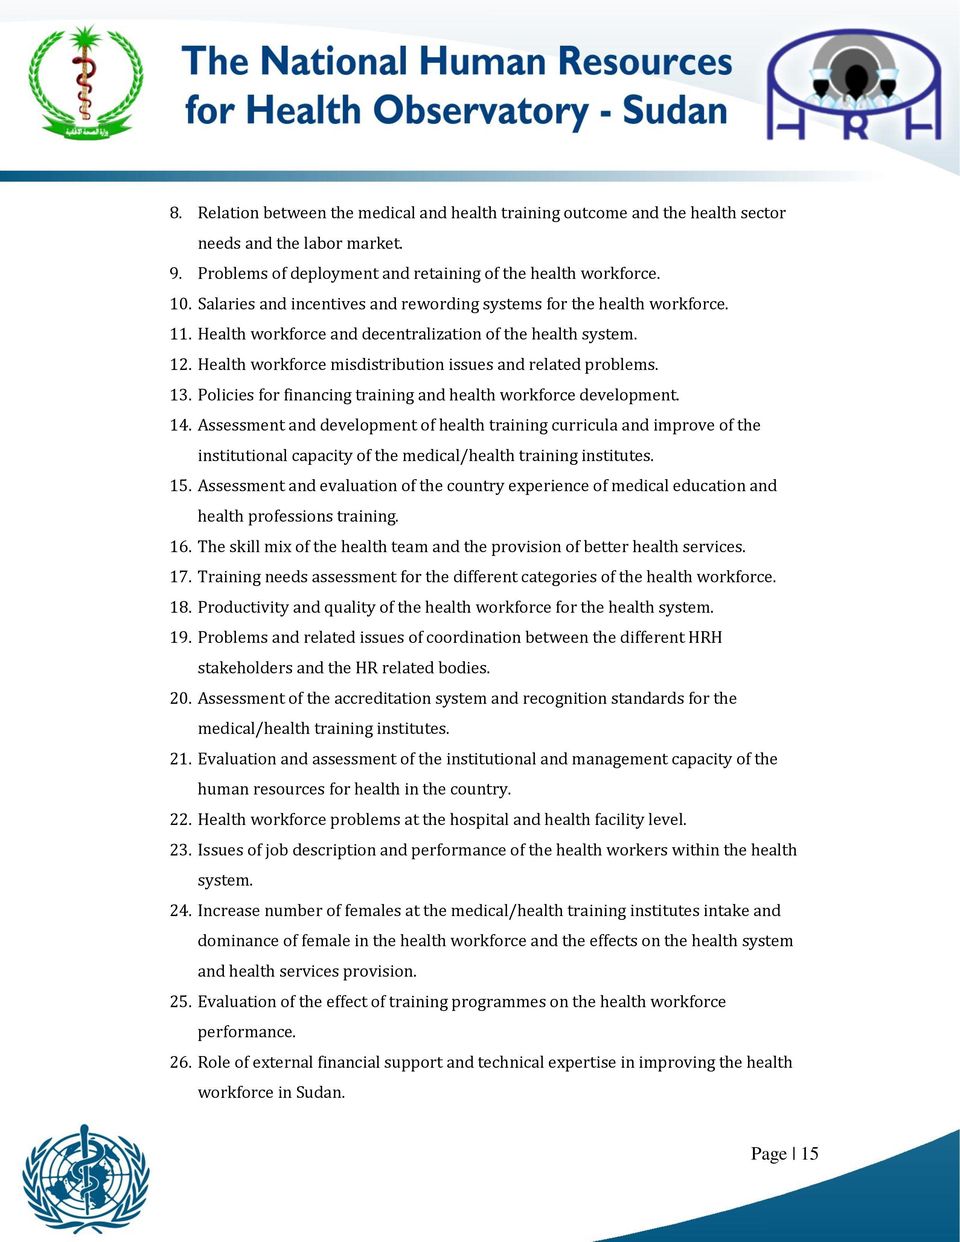 Health workforce misdistribution issues and related problems. 13. Policies for financing training and health workforce development. 14.